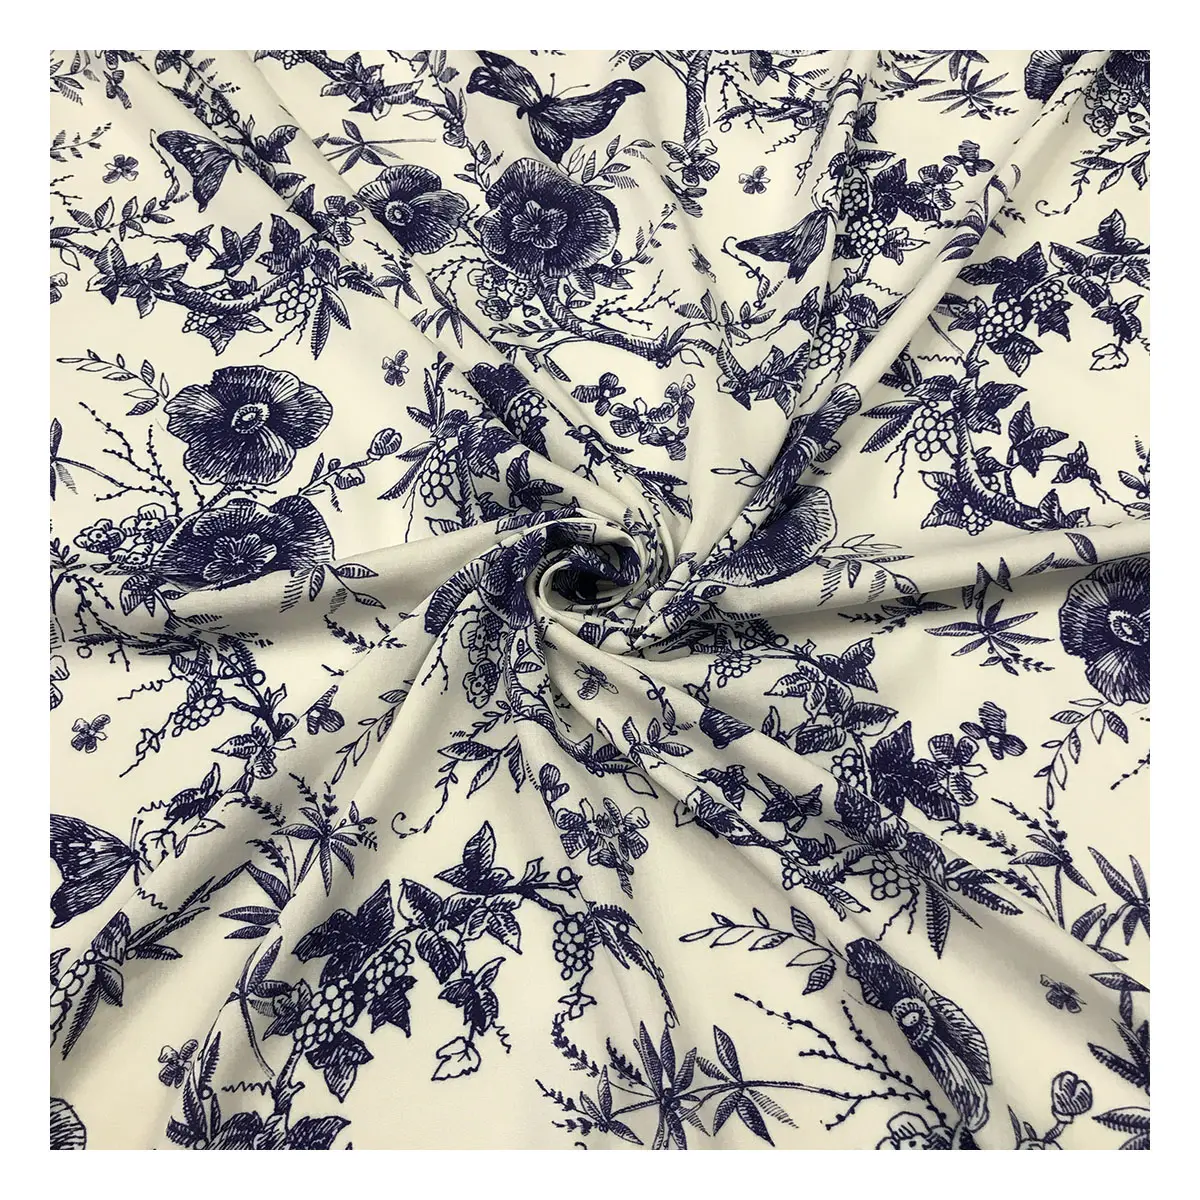 The factory outlet hand drawing blue toile de jouy fabric patterns digital printed floral rayon fabric for clothing